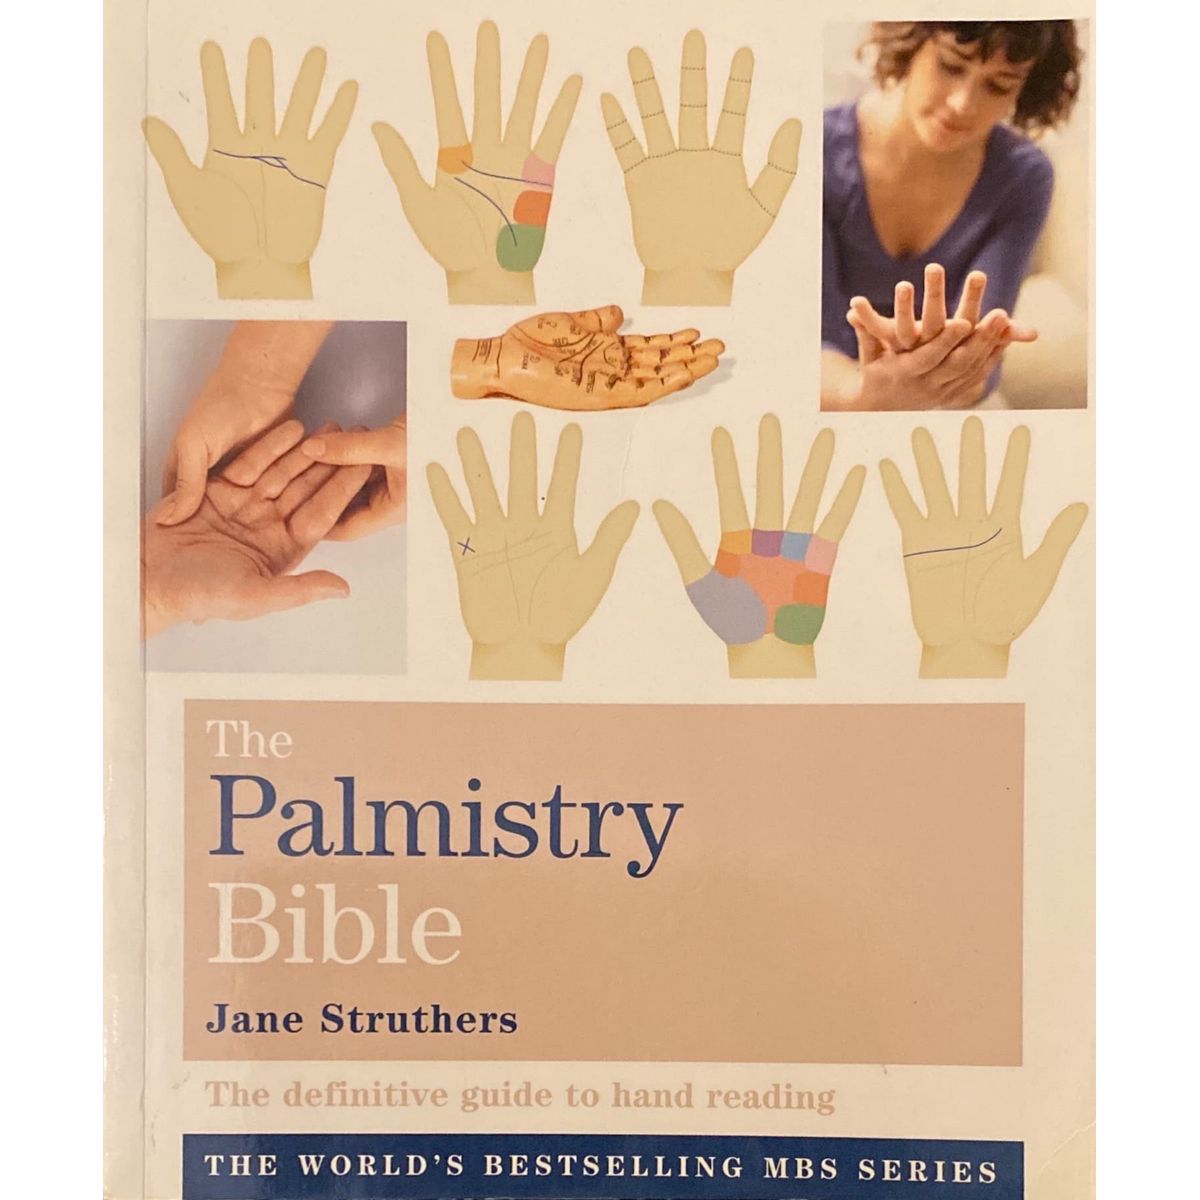 ISBN: 9781841813752 / 1841813753 - The Palmistry Bible by Jane Struthers [2009]